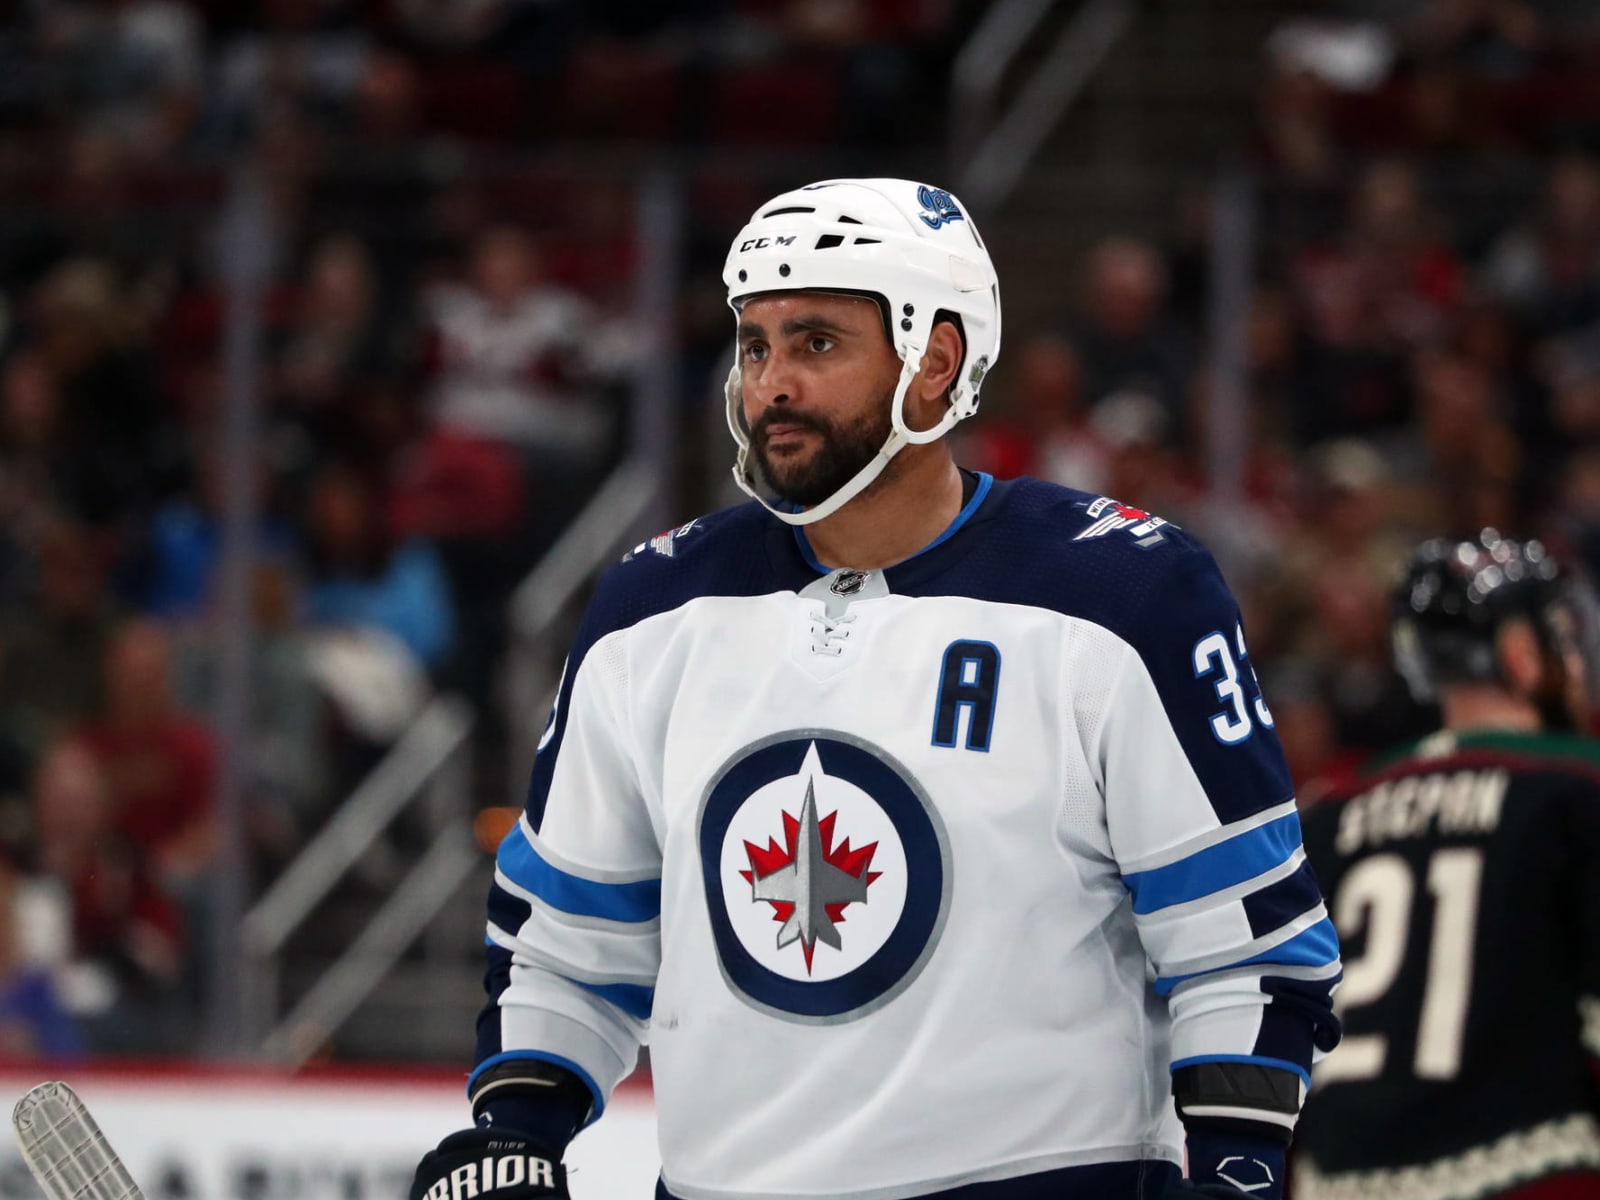 Jets, Dustin Byfuglien agree to terminate his contract